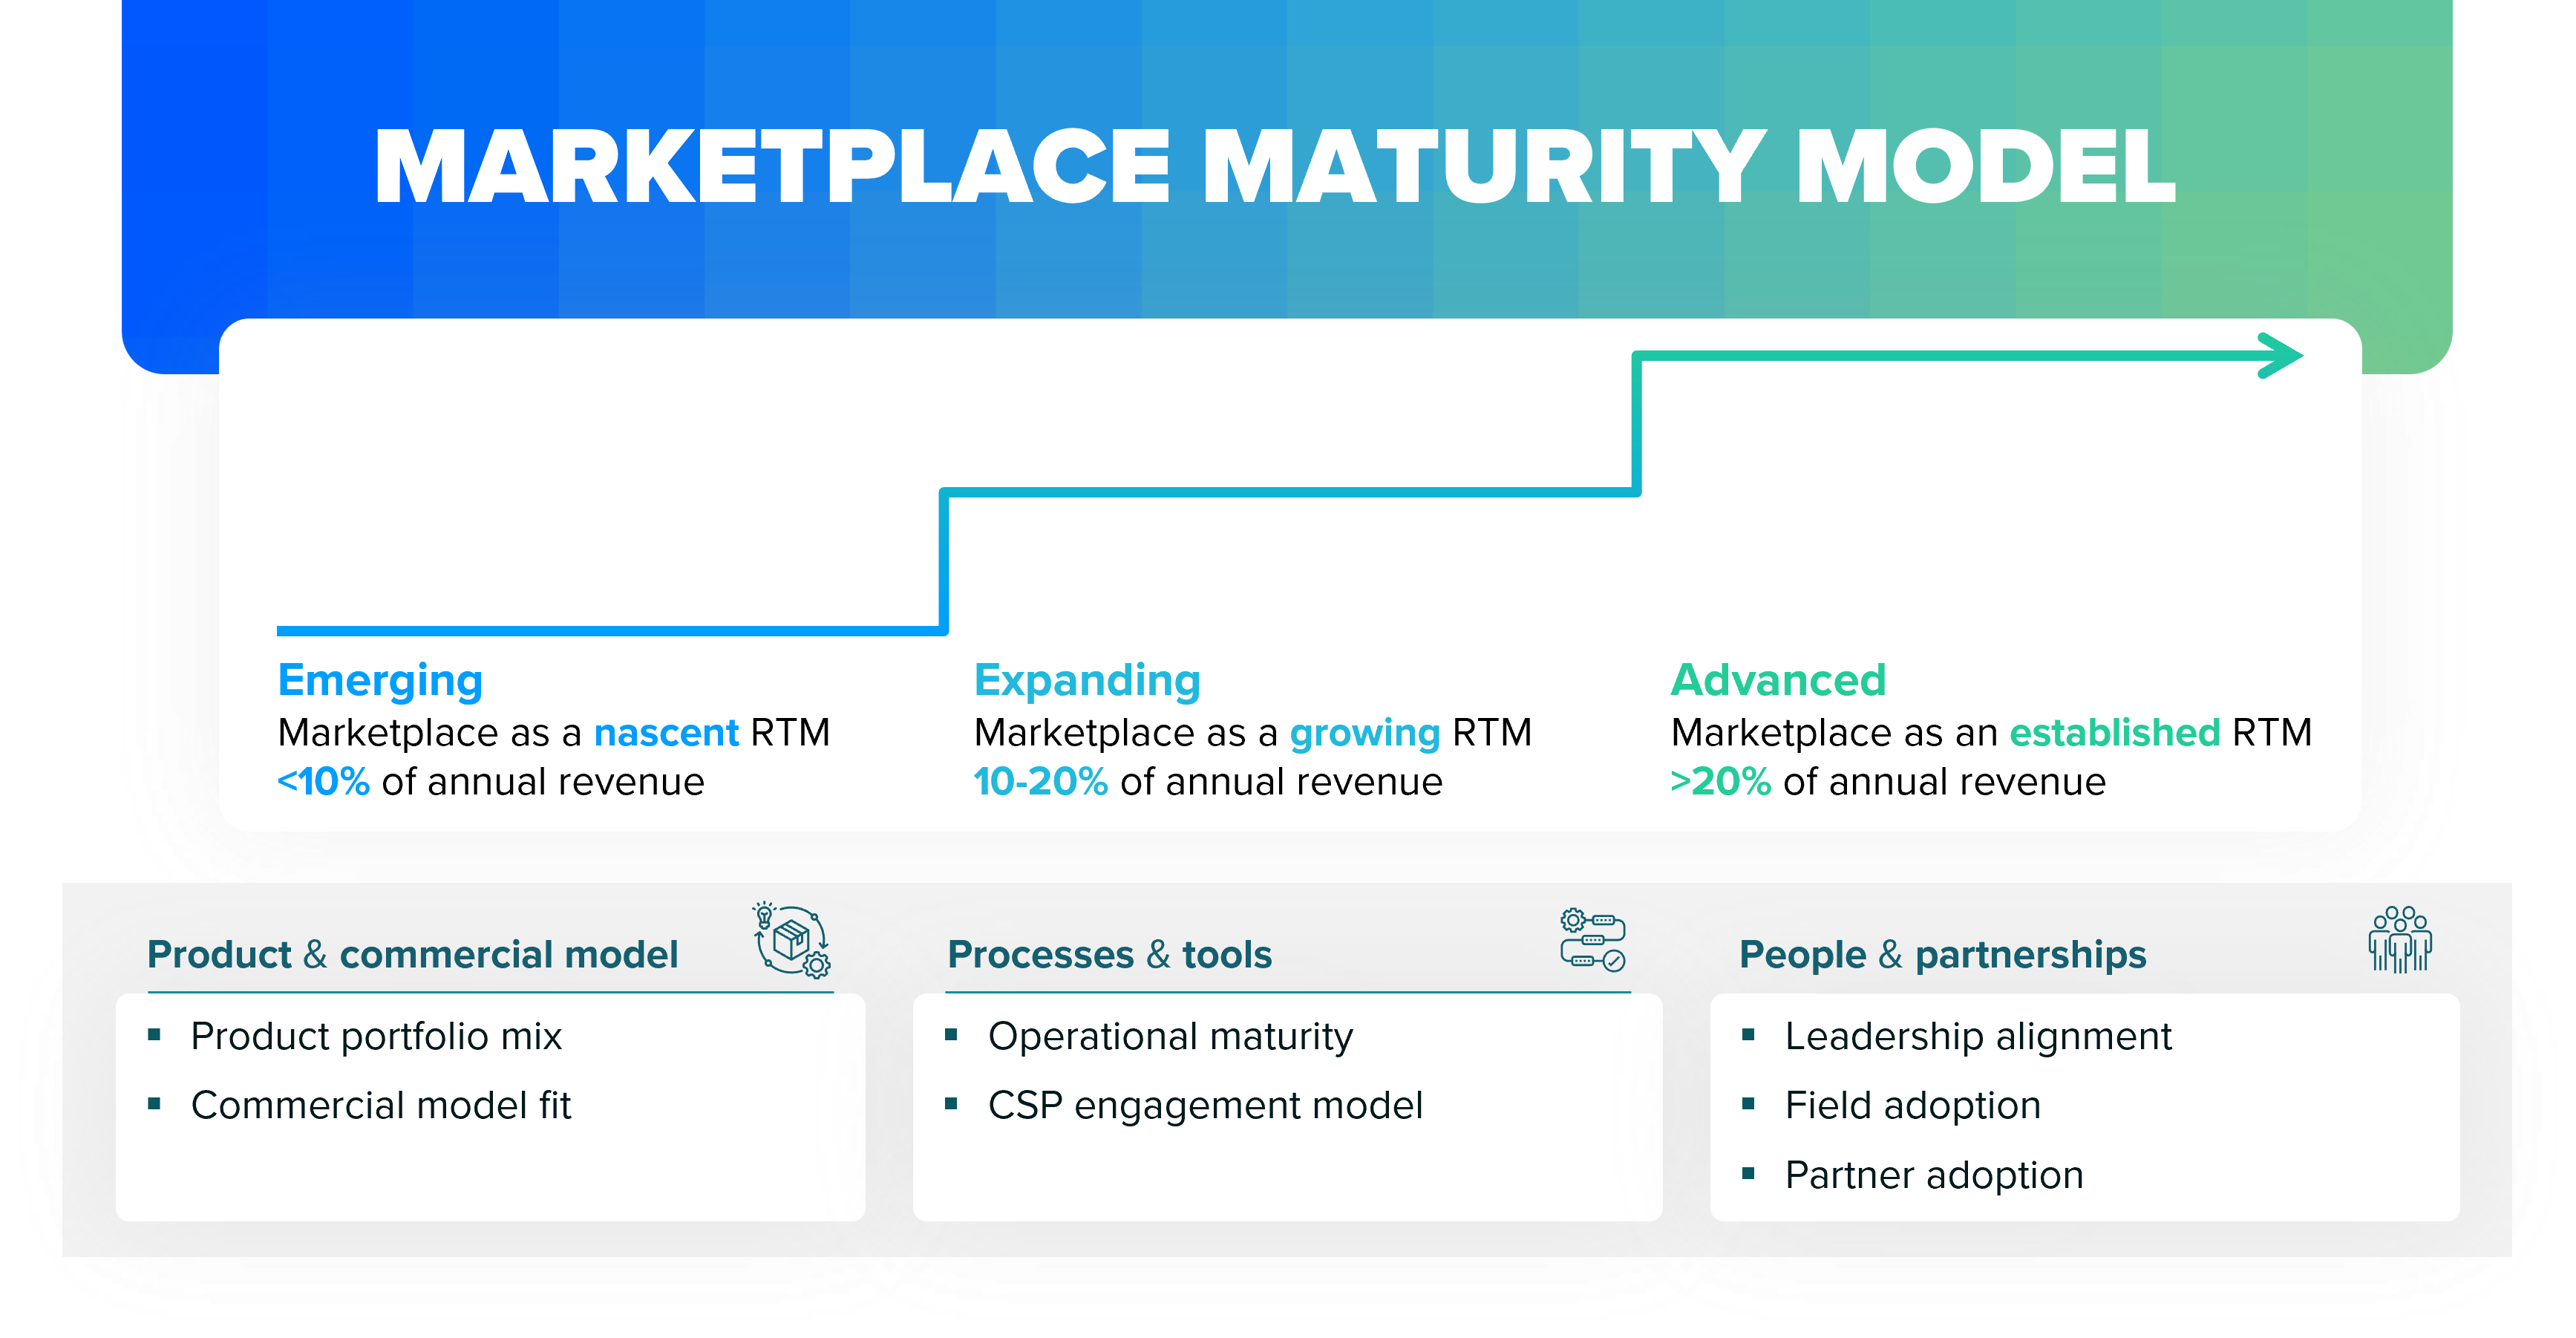 Spur Reply's Marketplace Maturity Model. Emerging Marketplace as a nascent RTM <10% of annual revenue. Expanding marketplace as a growing RTM 10-20% of annual revenue. Advanced marketplace as an established RTM >20% of annual revenue.